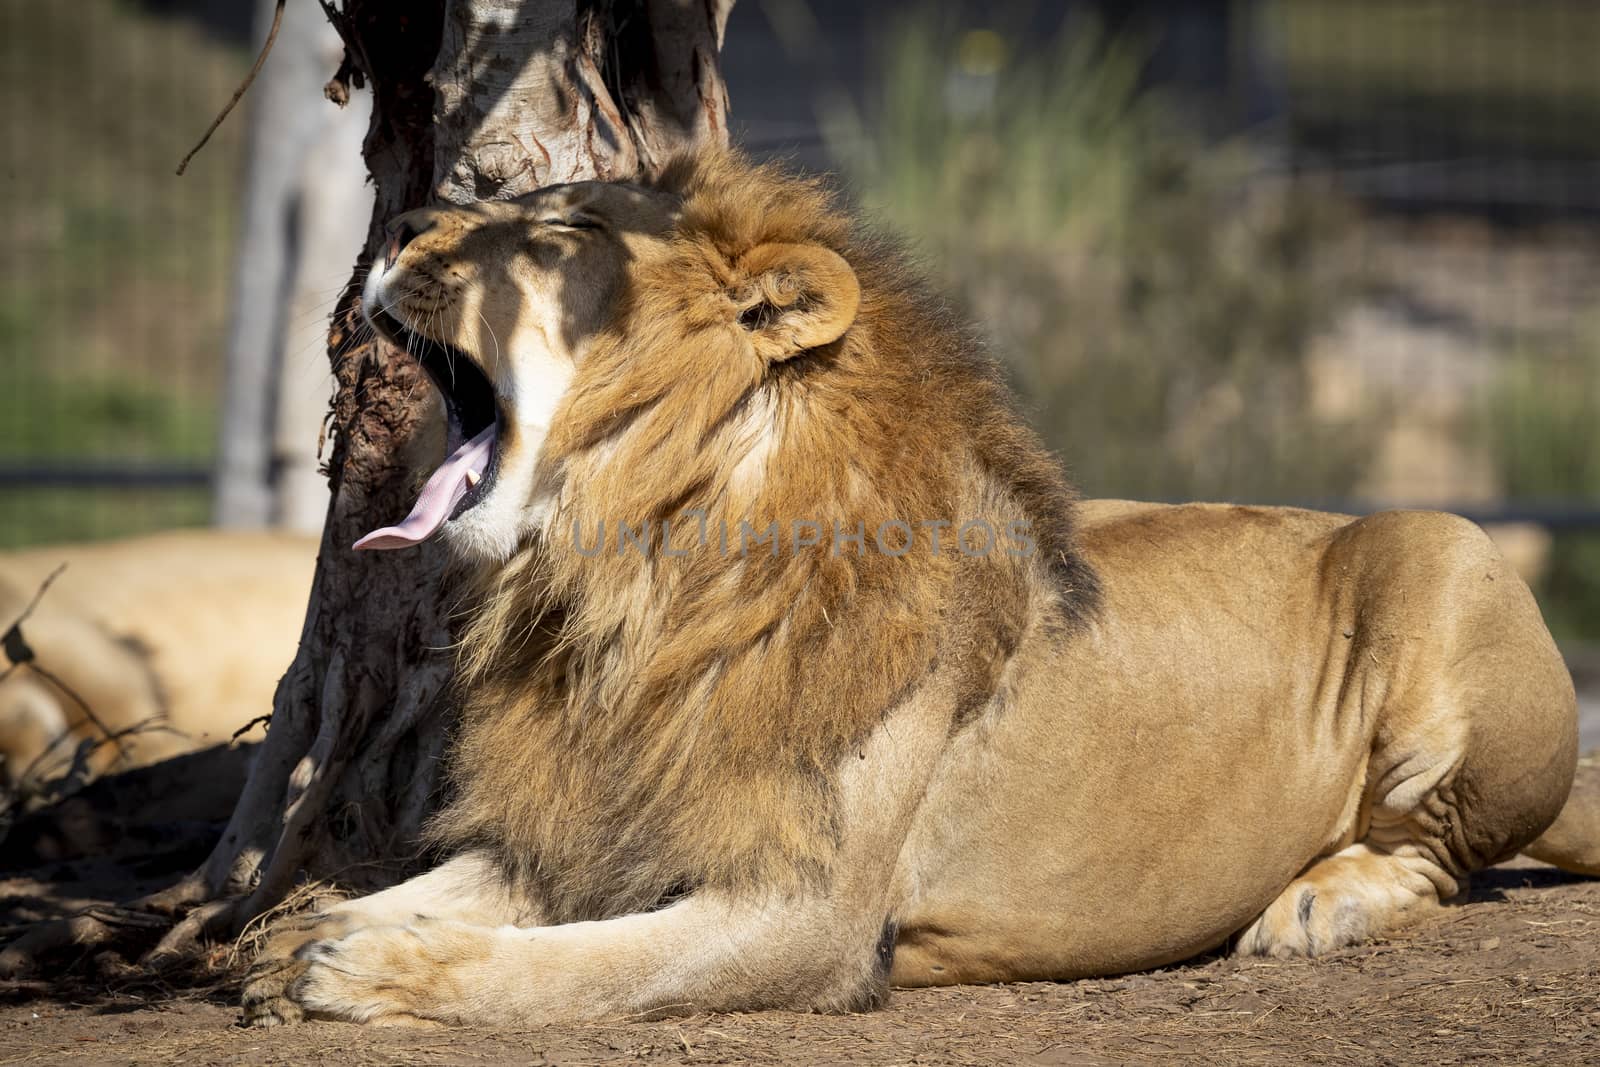 A male Lion resting and yawning in the sunshine by WittkePhotos